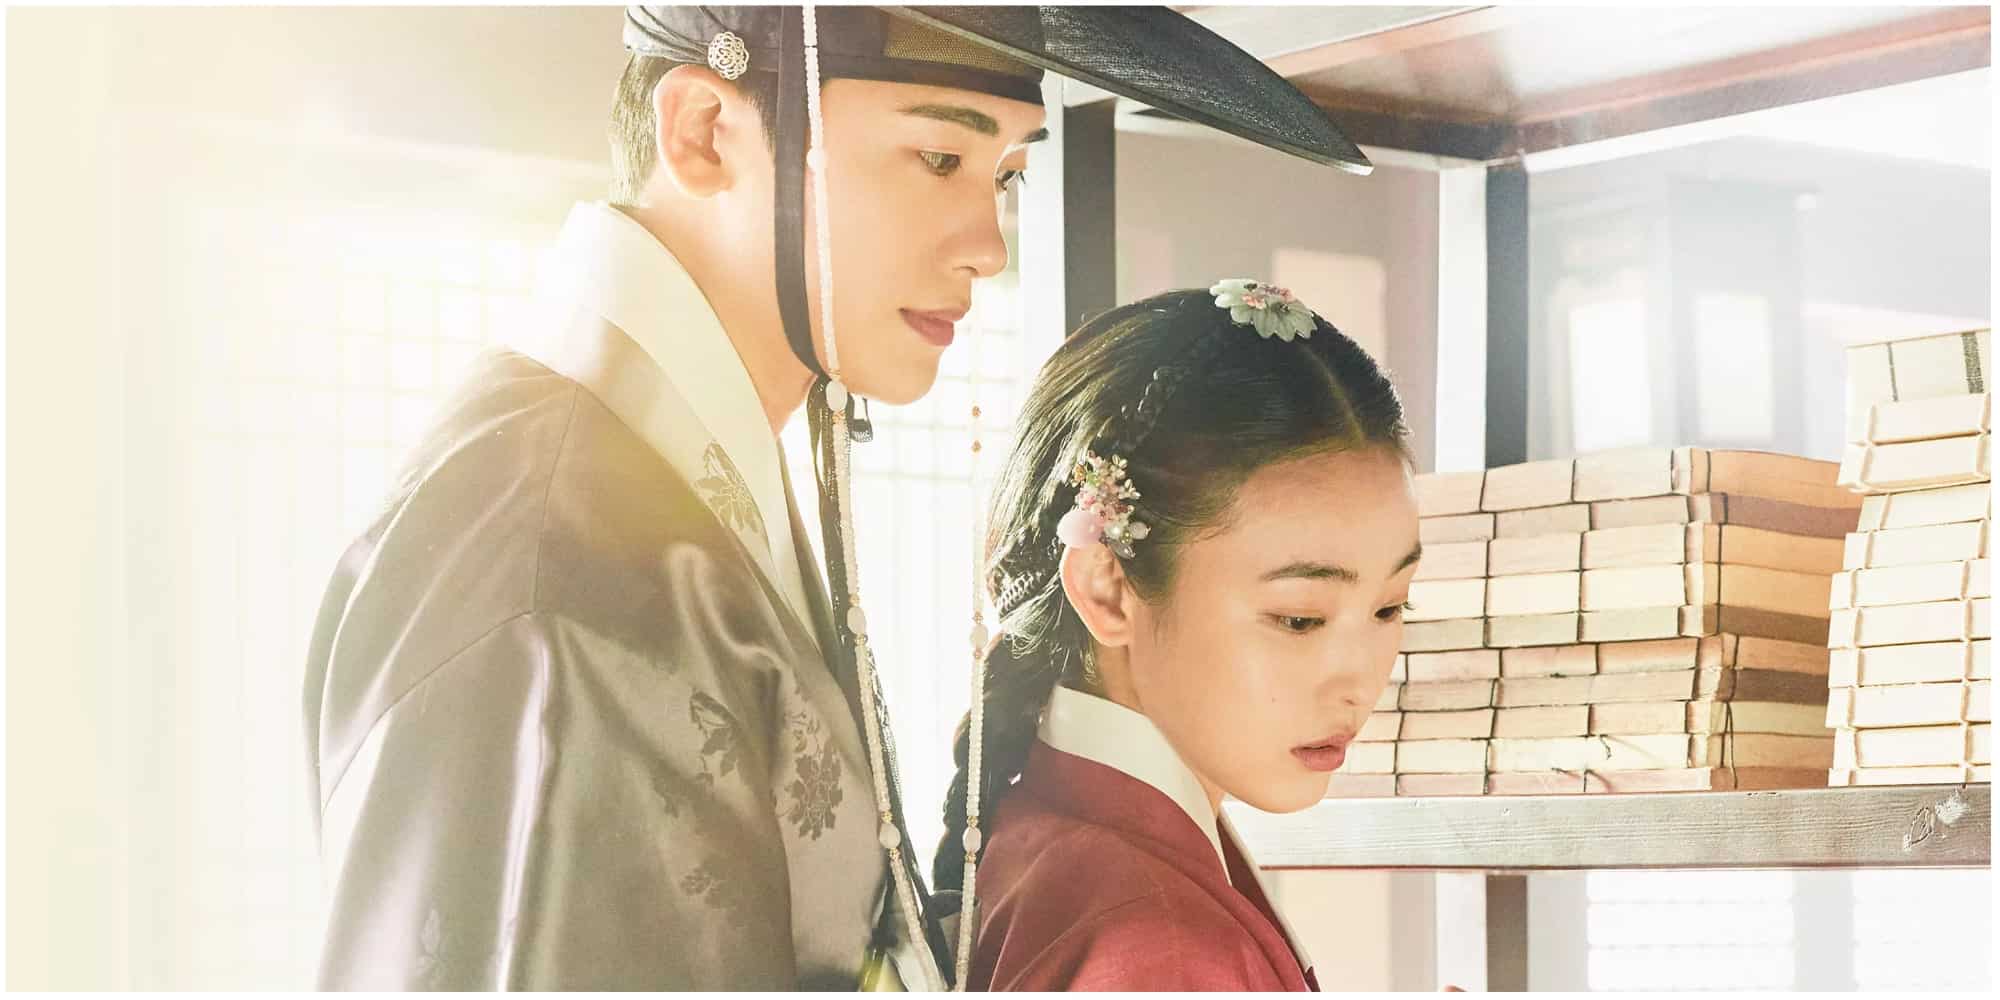 Our Blooming Youth Historical K-drama Episode 6 Synopsis 